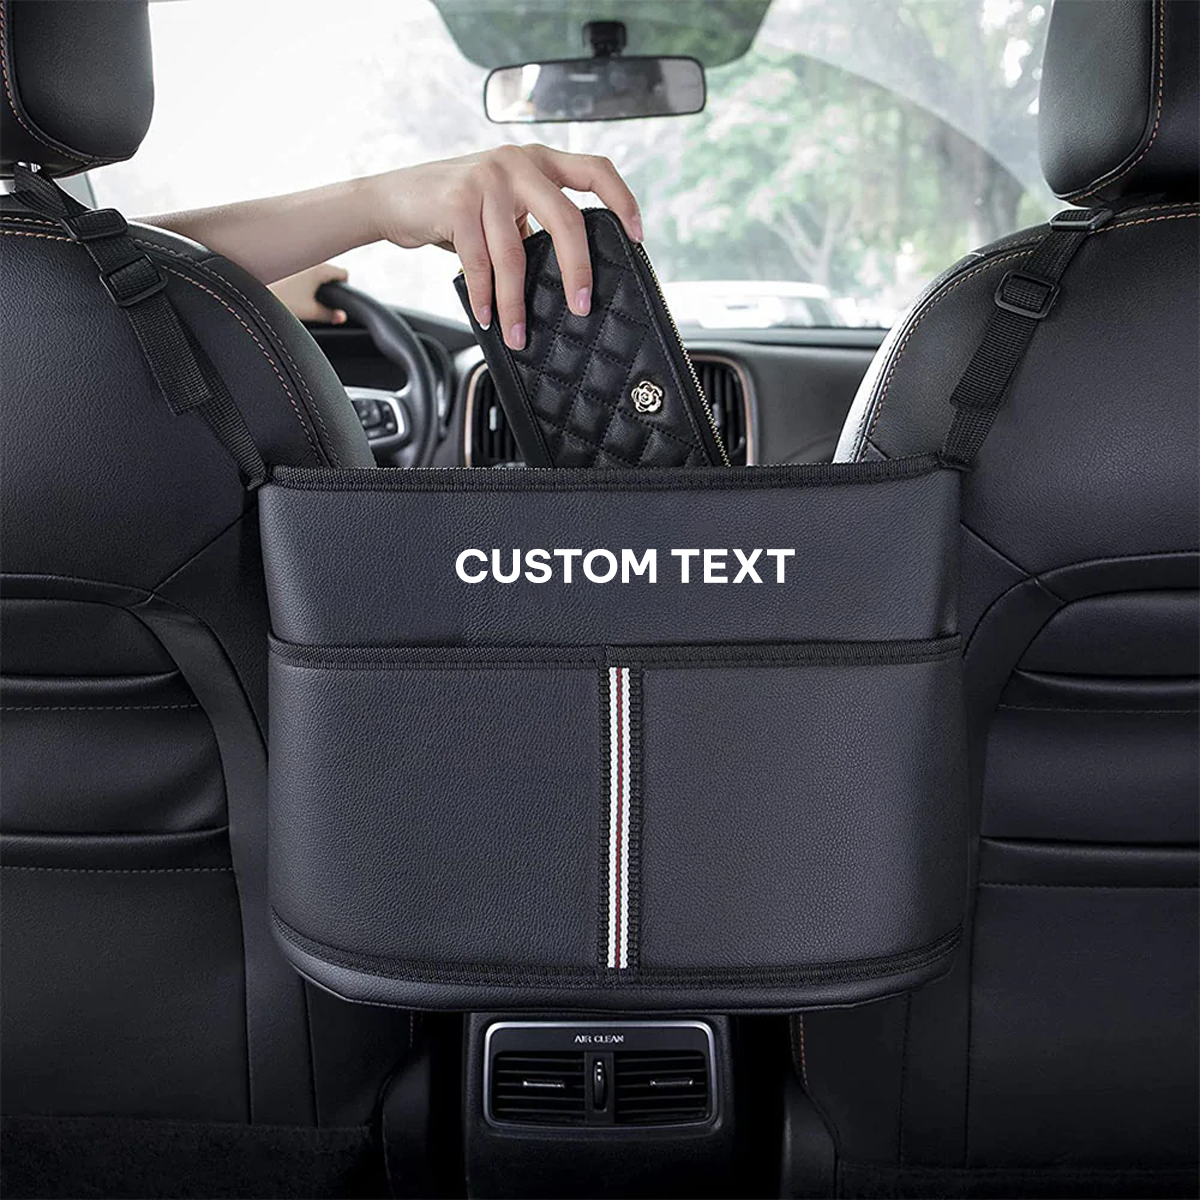 Custom Text For Car Purse Holder for Car Handbag Holder Between Seats Premium PU Leather, Compatible with All Cars, Auto Driver Or Passenger Accessories Organizer, Hanging Car Purse Storage Pocket Back Seat Pet Barrier VE11991